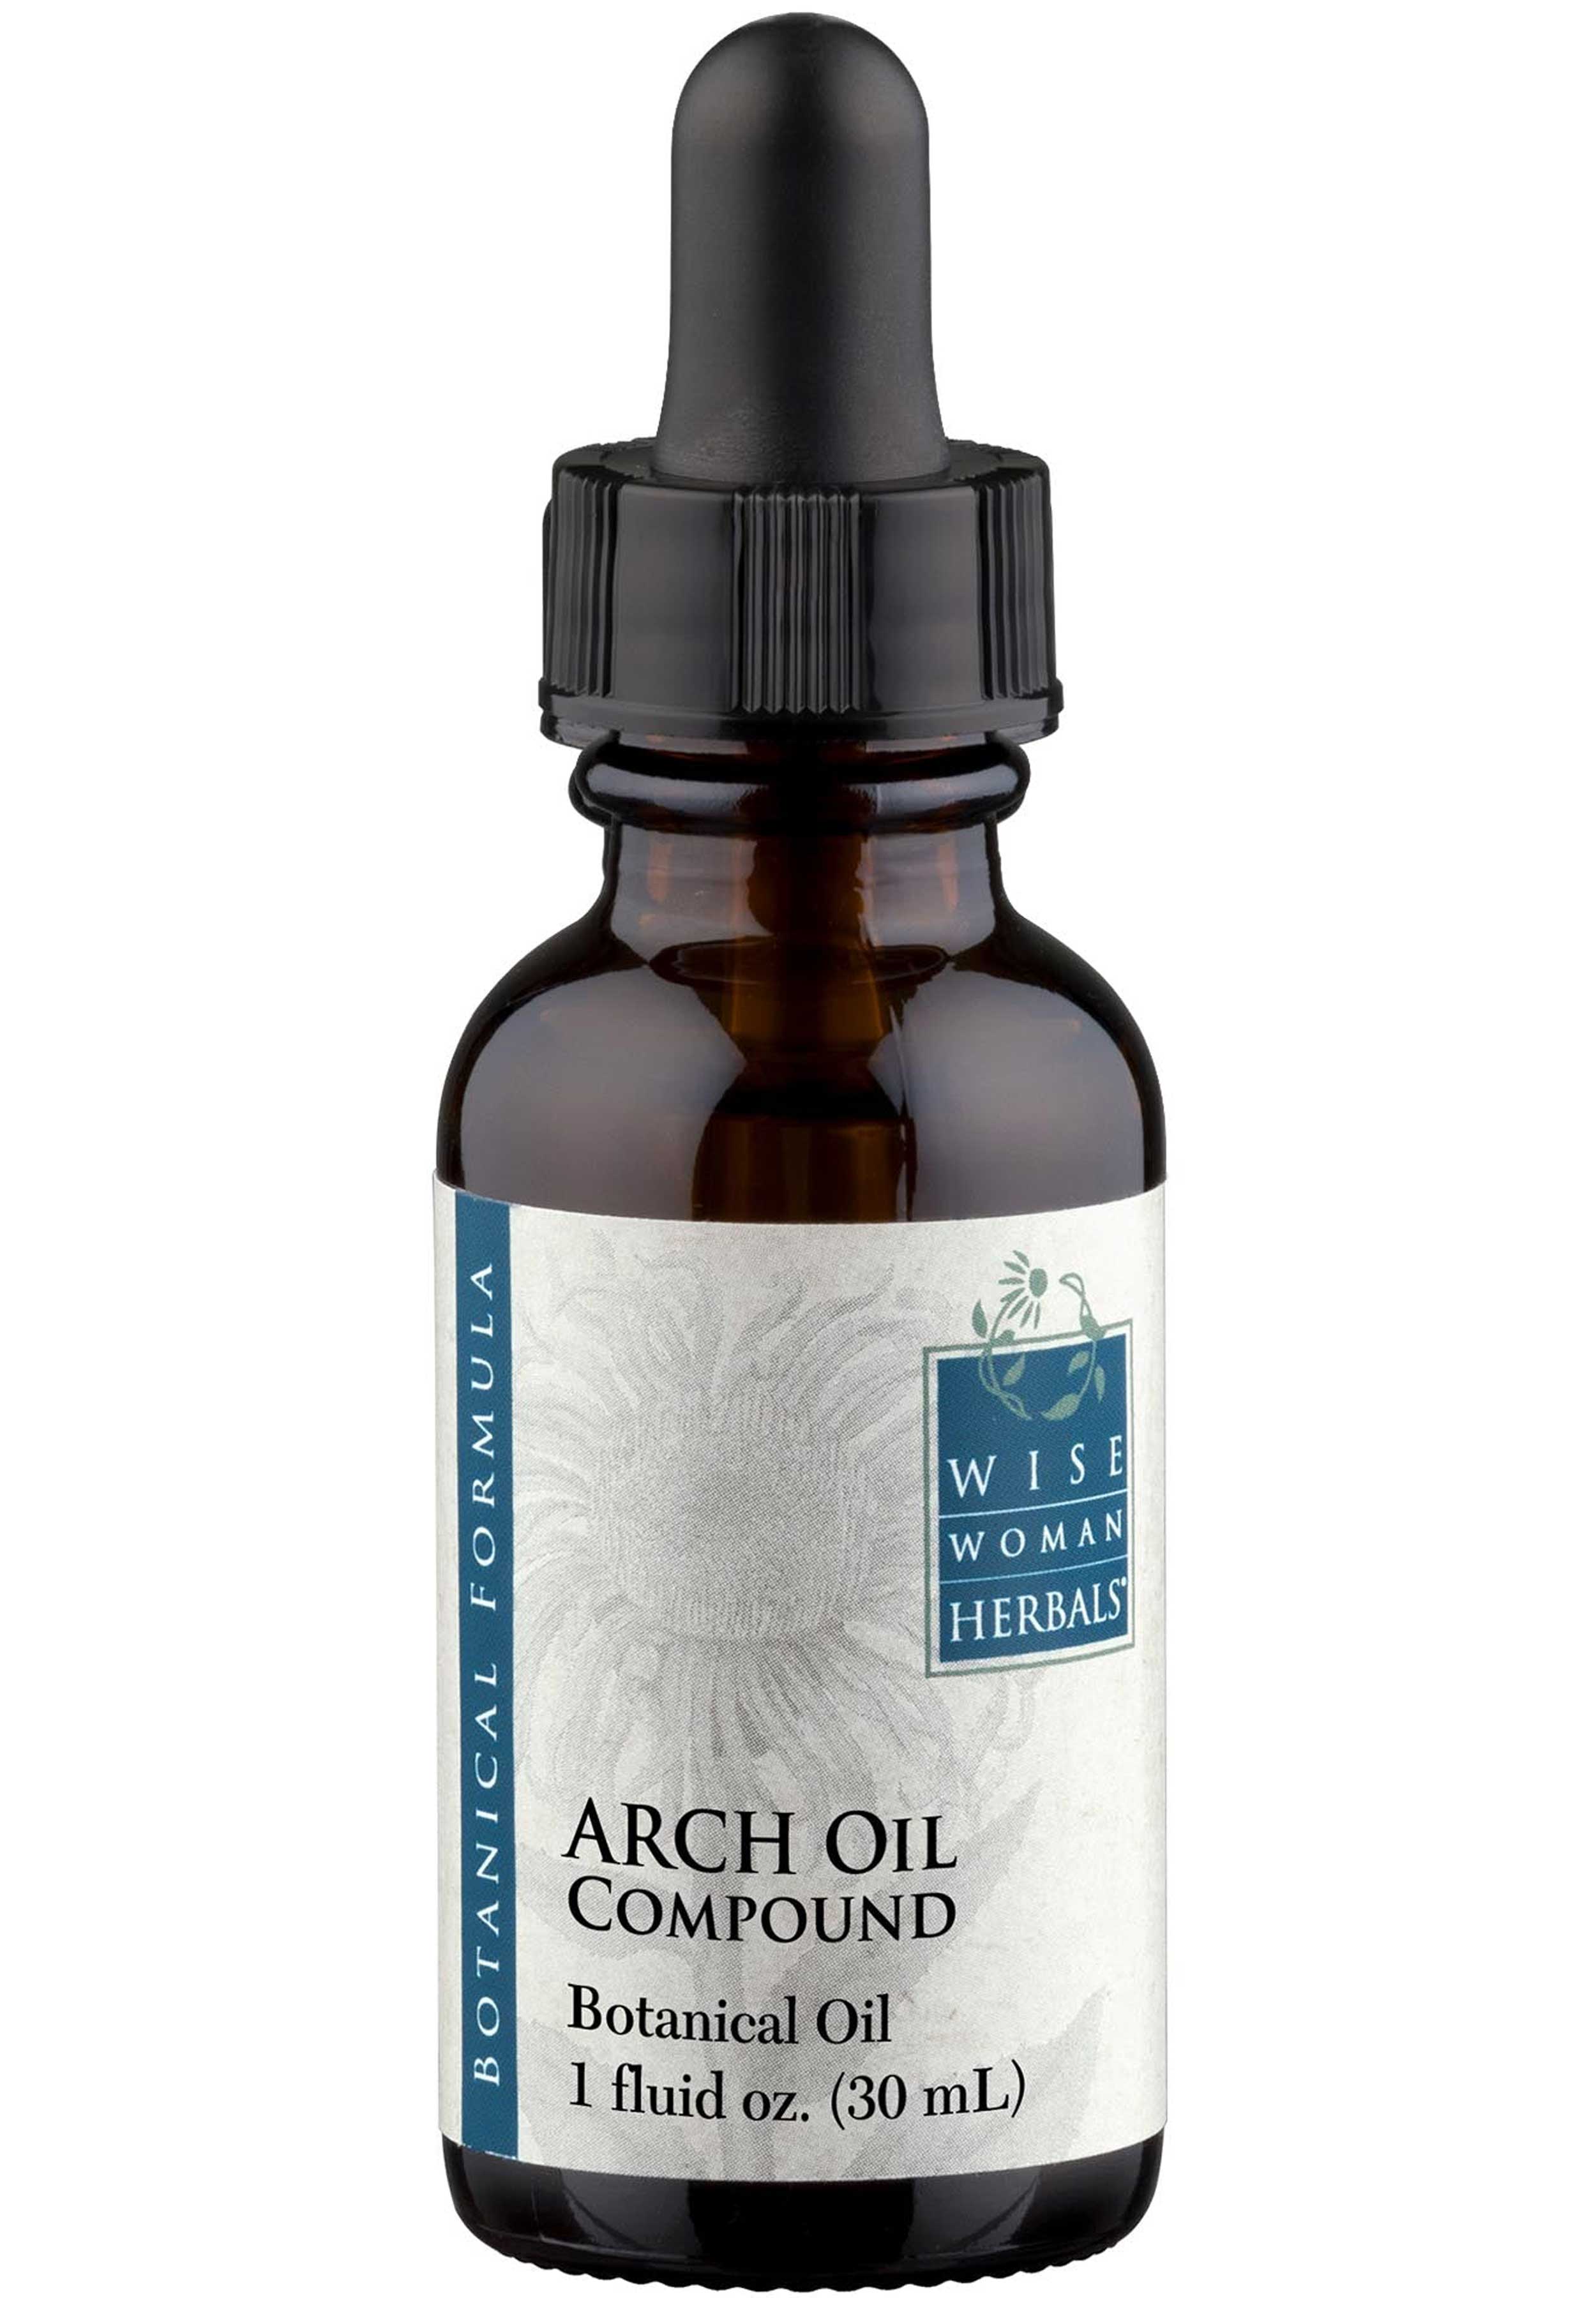 Wise Woman Herbals ARCH Oil Compound